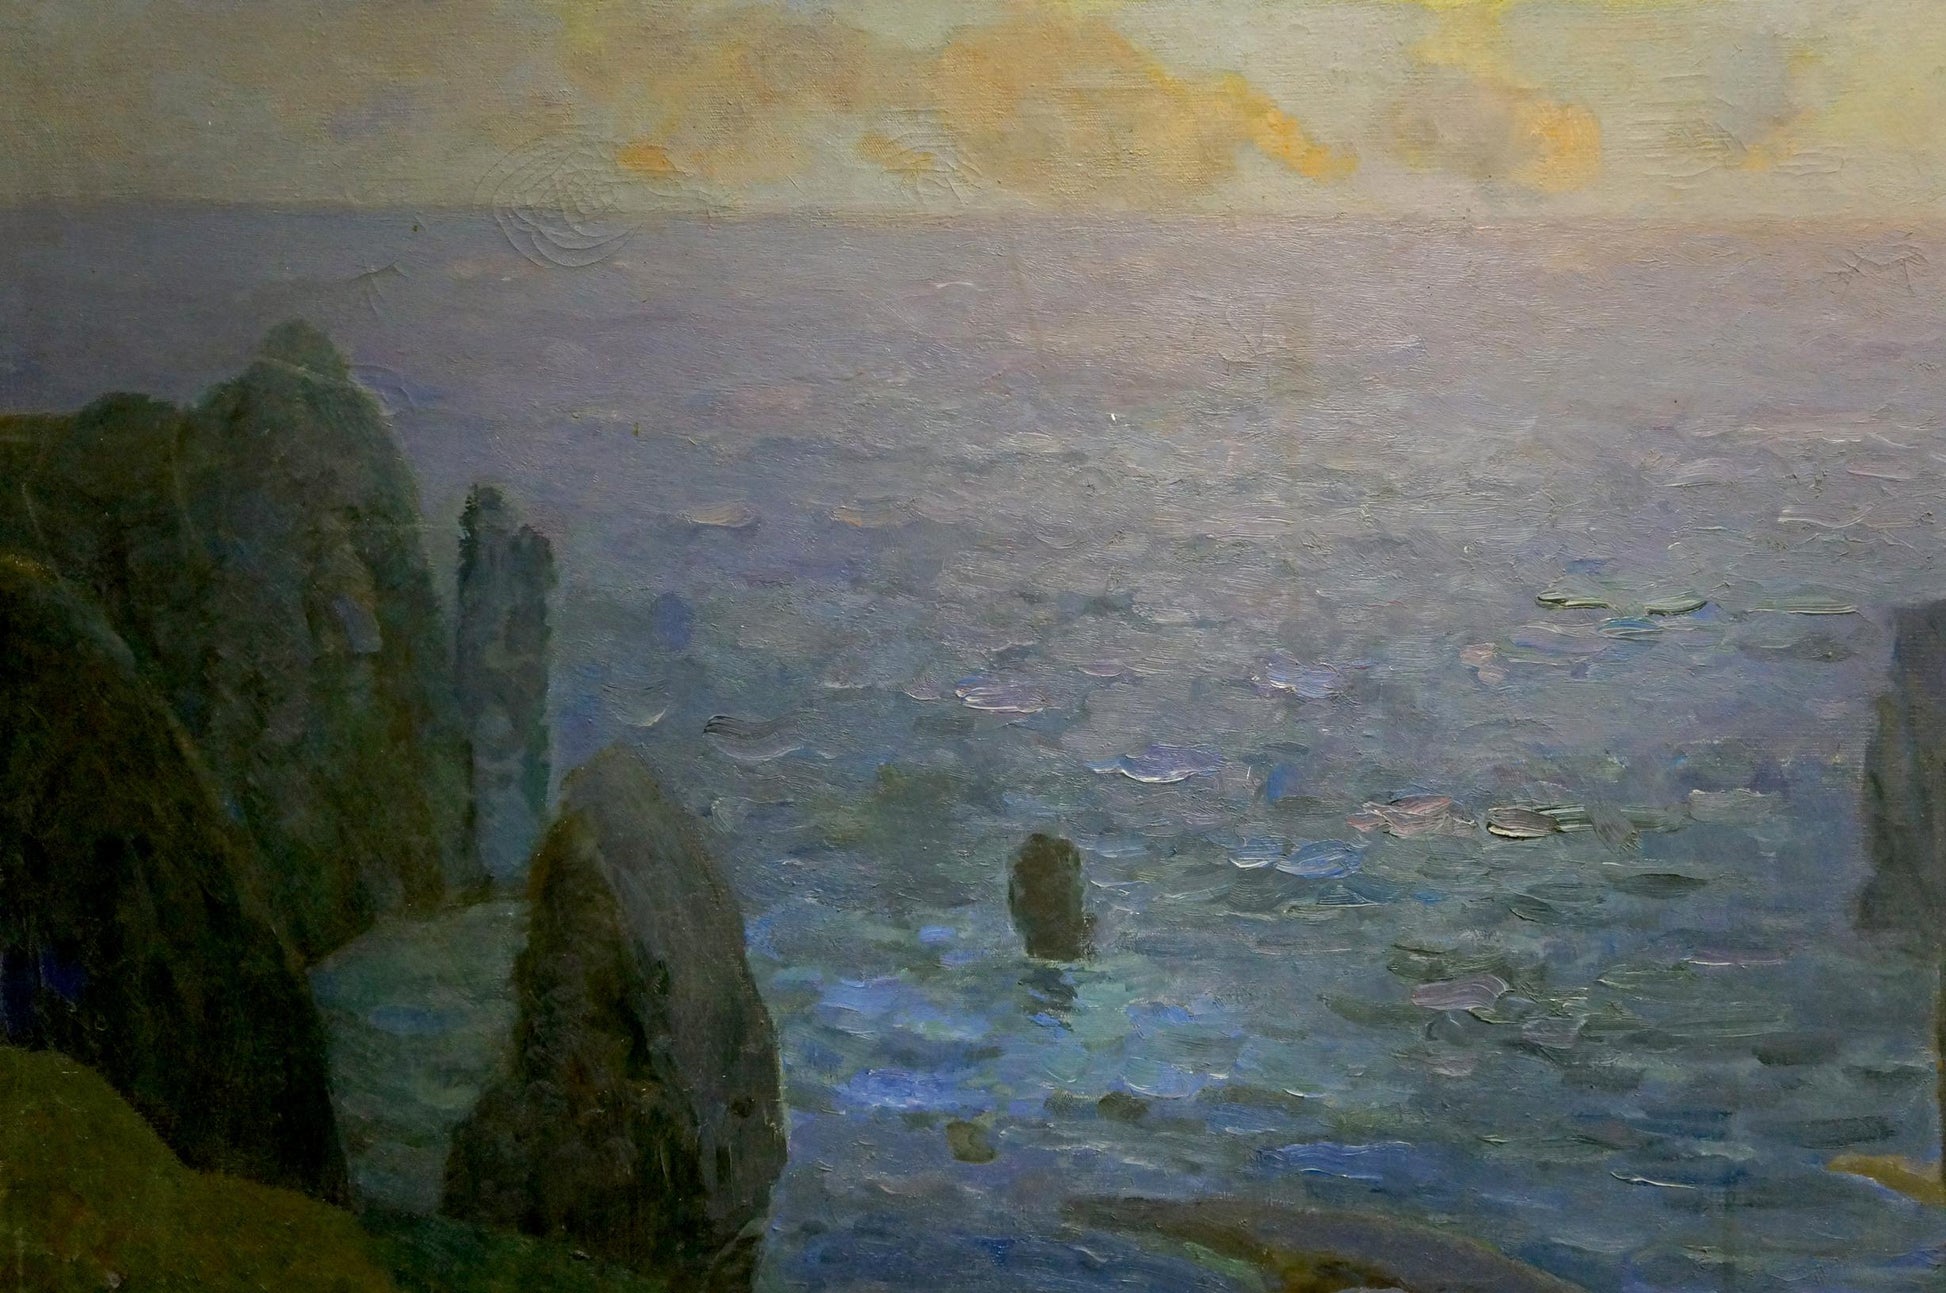 Solitude on the Sea depicted in oil